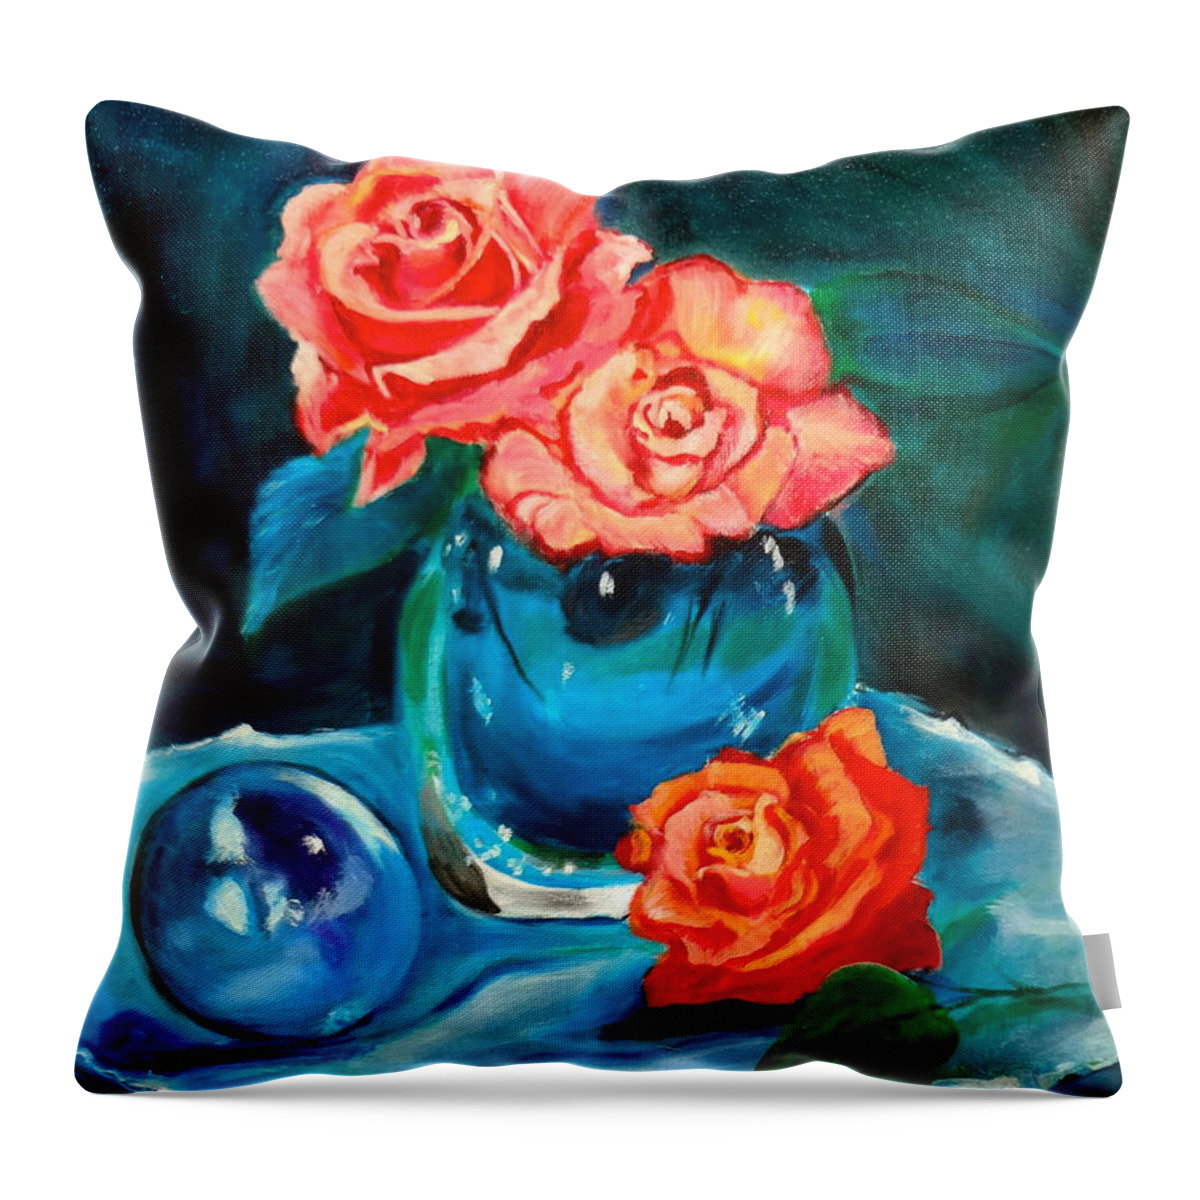 Turquoise Floral Throw Pillow featuring the painting Turquoise Ball by Jenny Lee